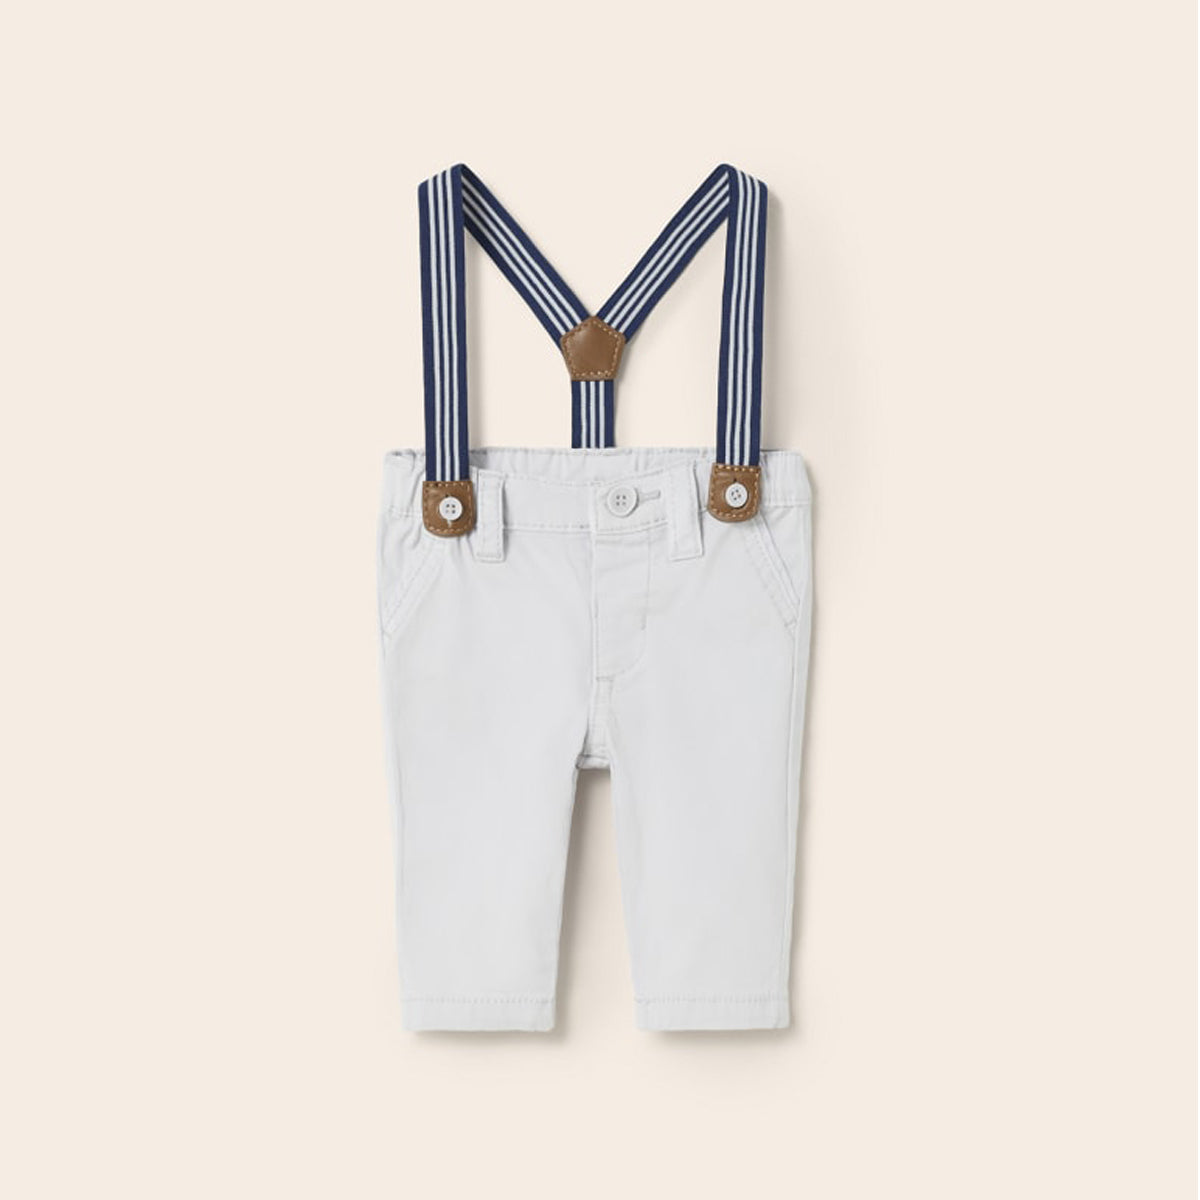 Newborn Silver Pants with Suspenders